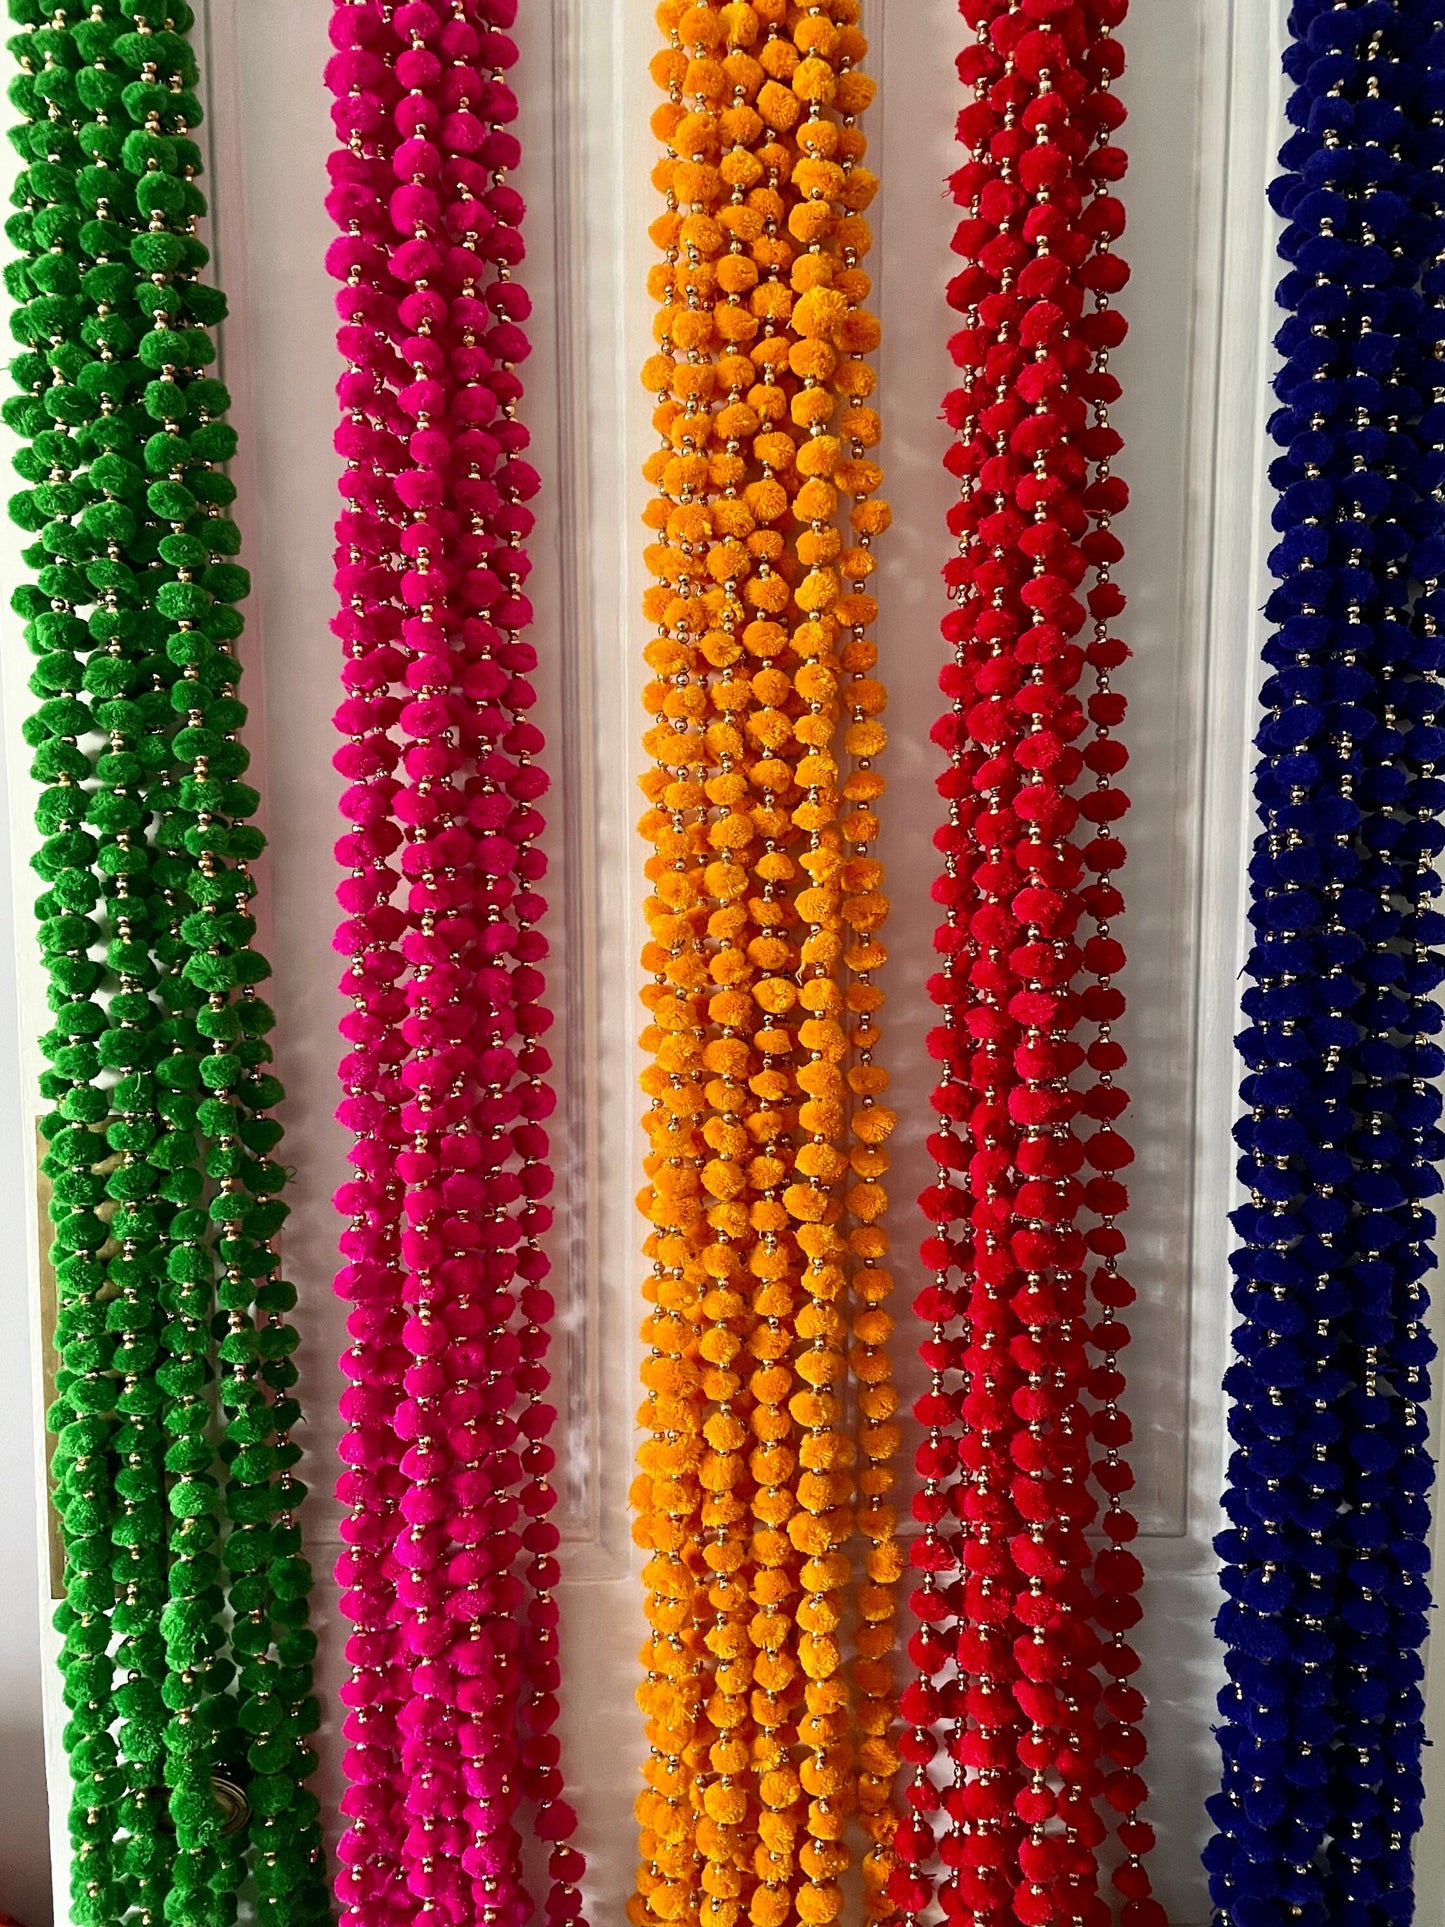 Pack of 5 Hanging Latkans for Home Decor Front Door Diwali Wedding 5 Feet Long Pom Poms Beads Bells Latkans Various Colours and Designs